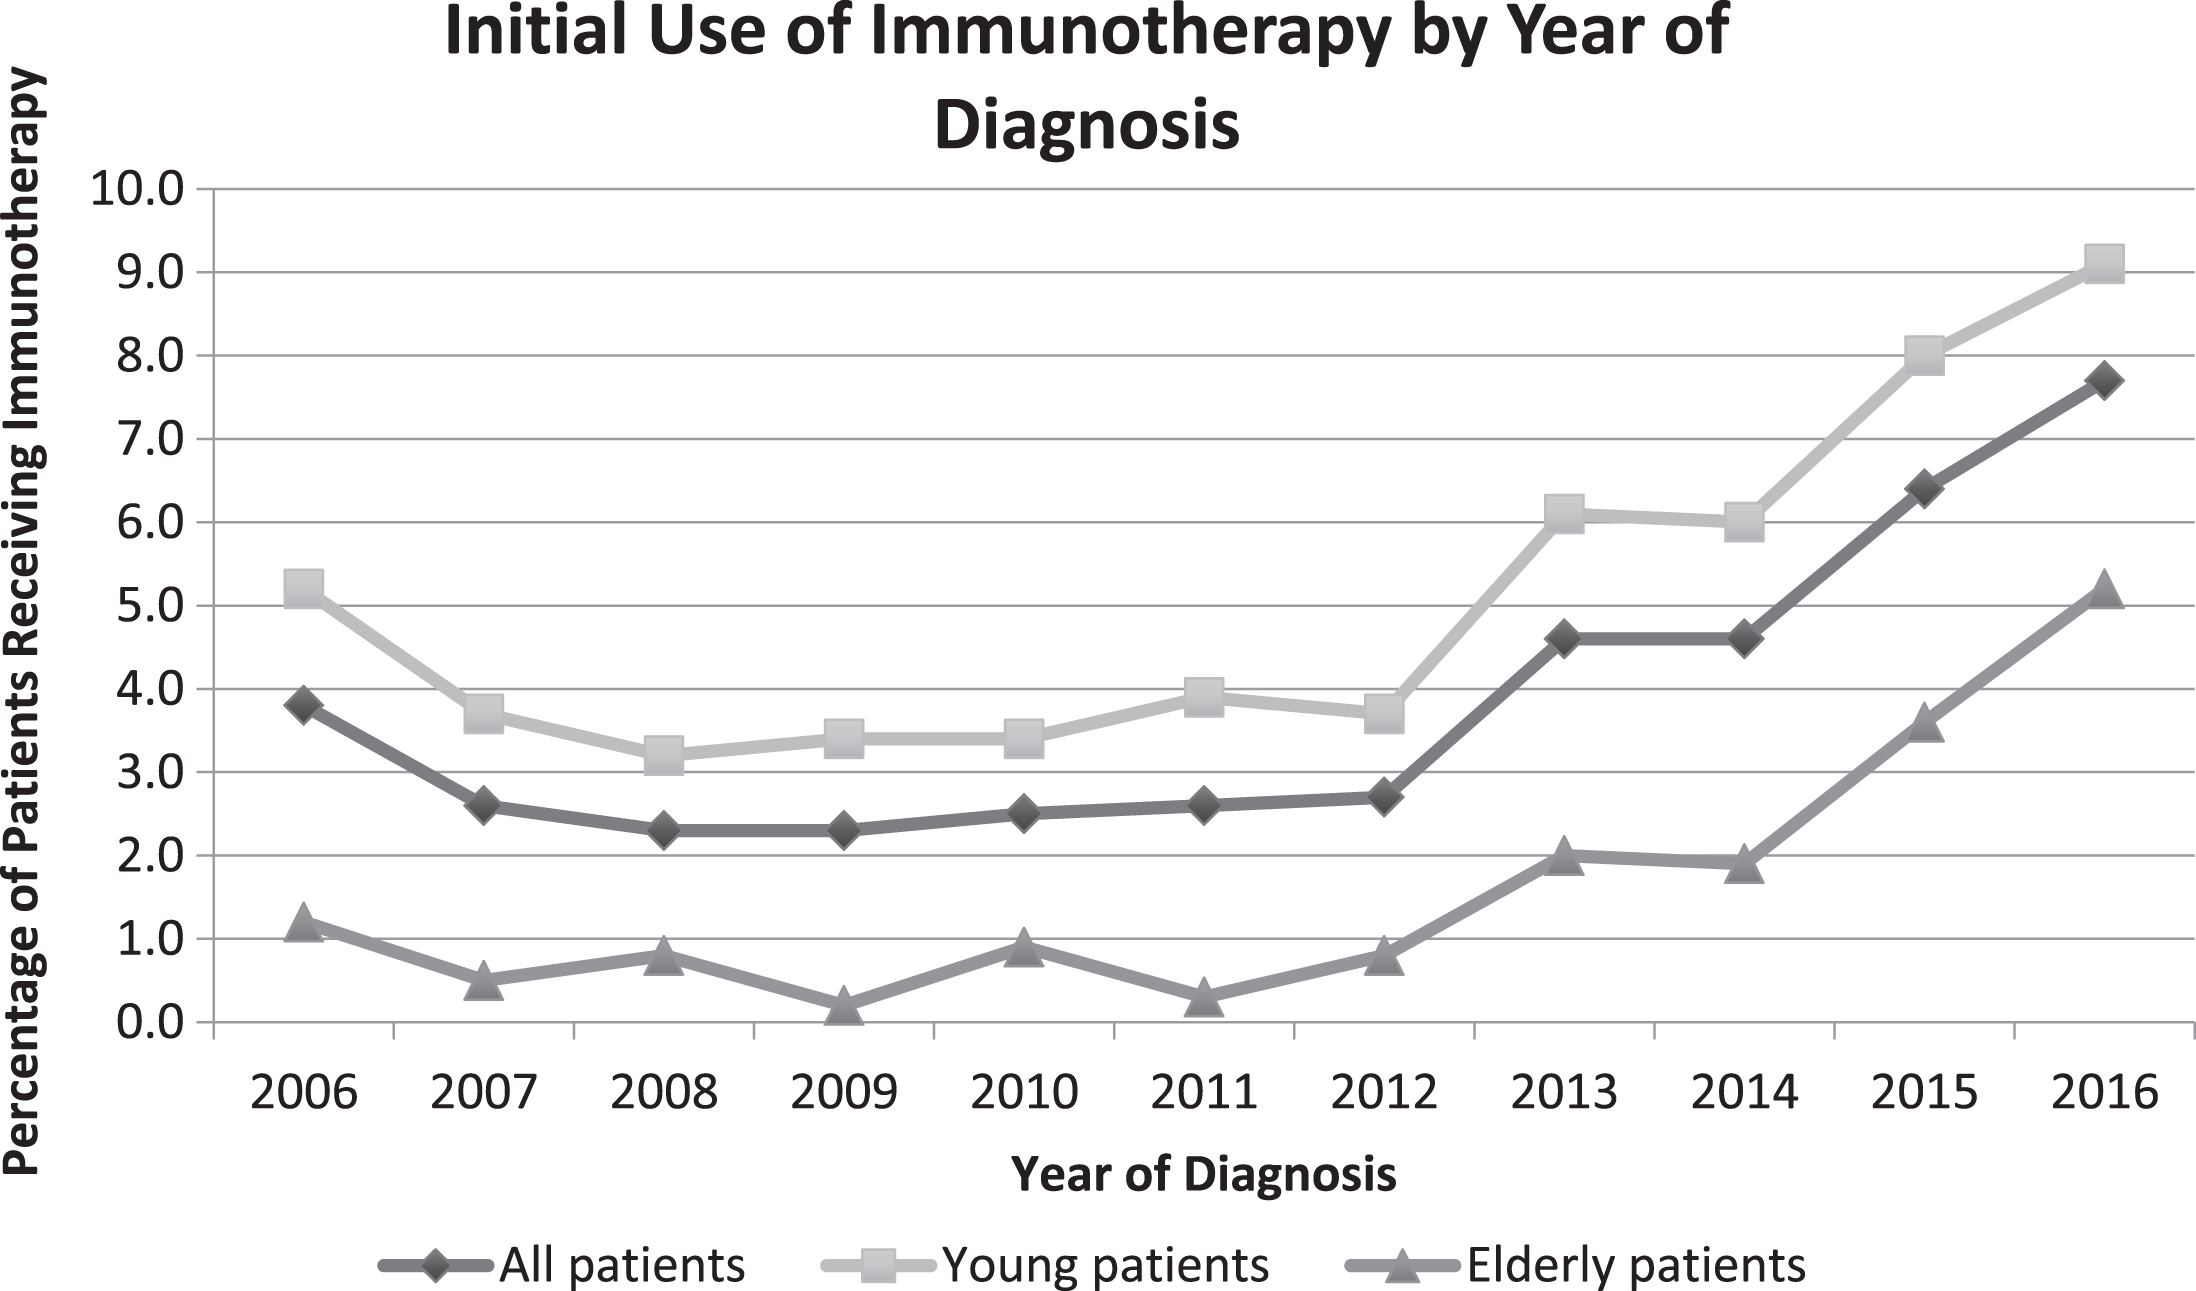 Trends in initial use of immunotherapy by patient age and year of diagnosis.